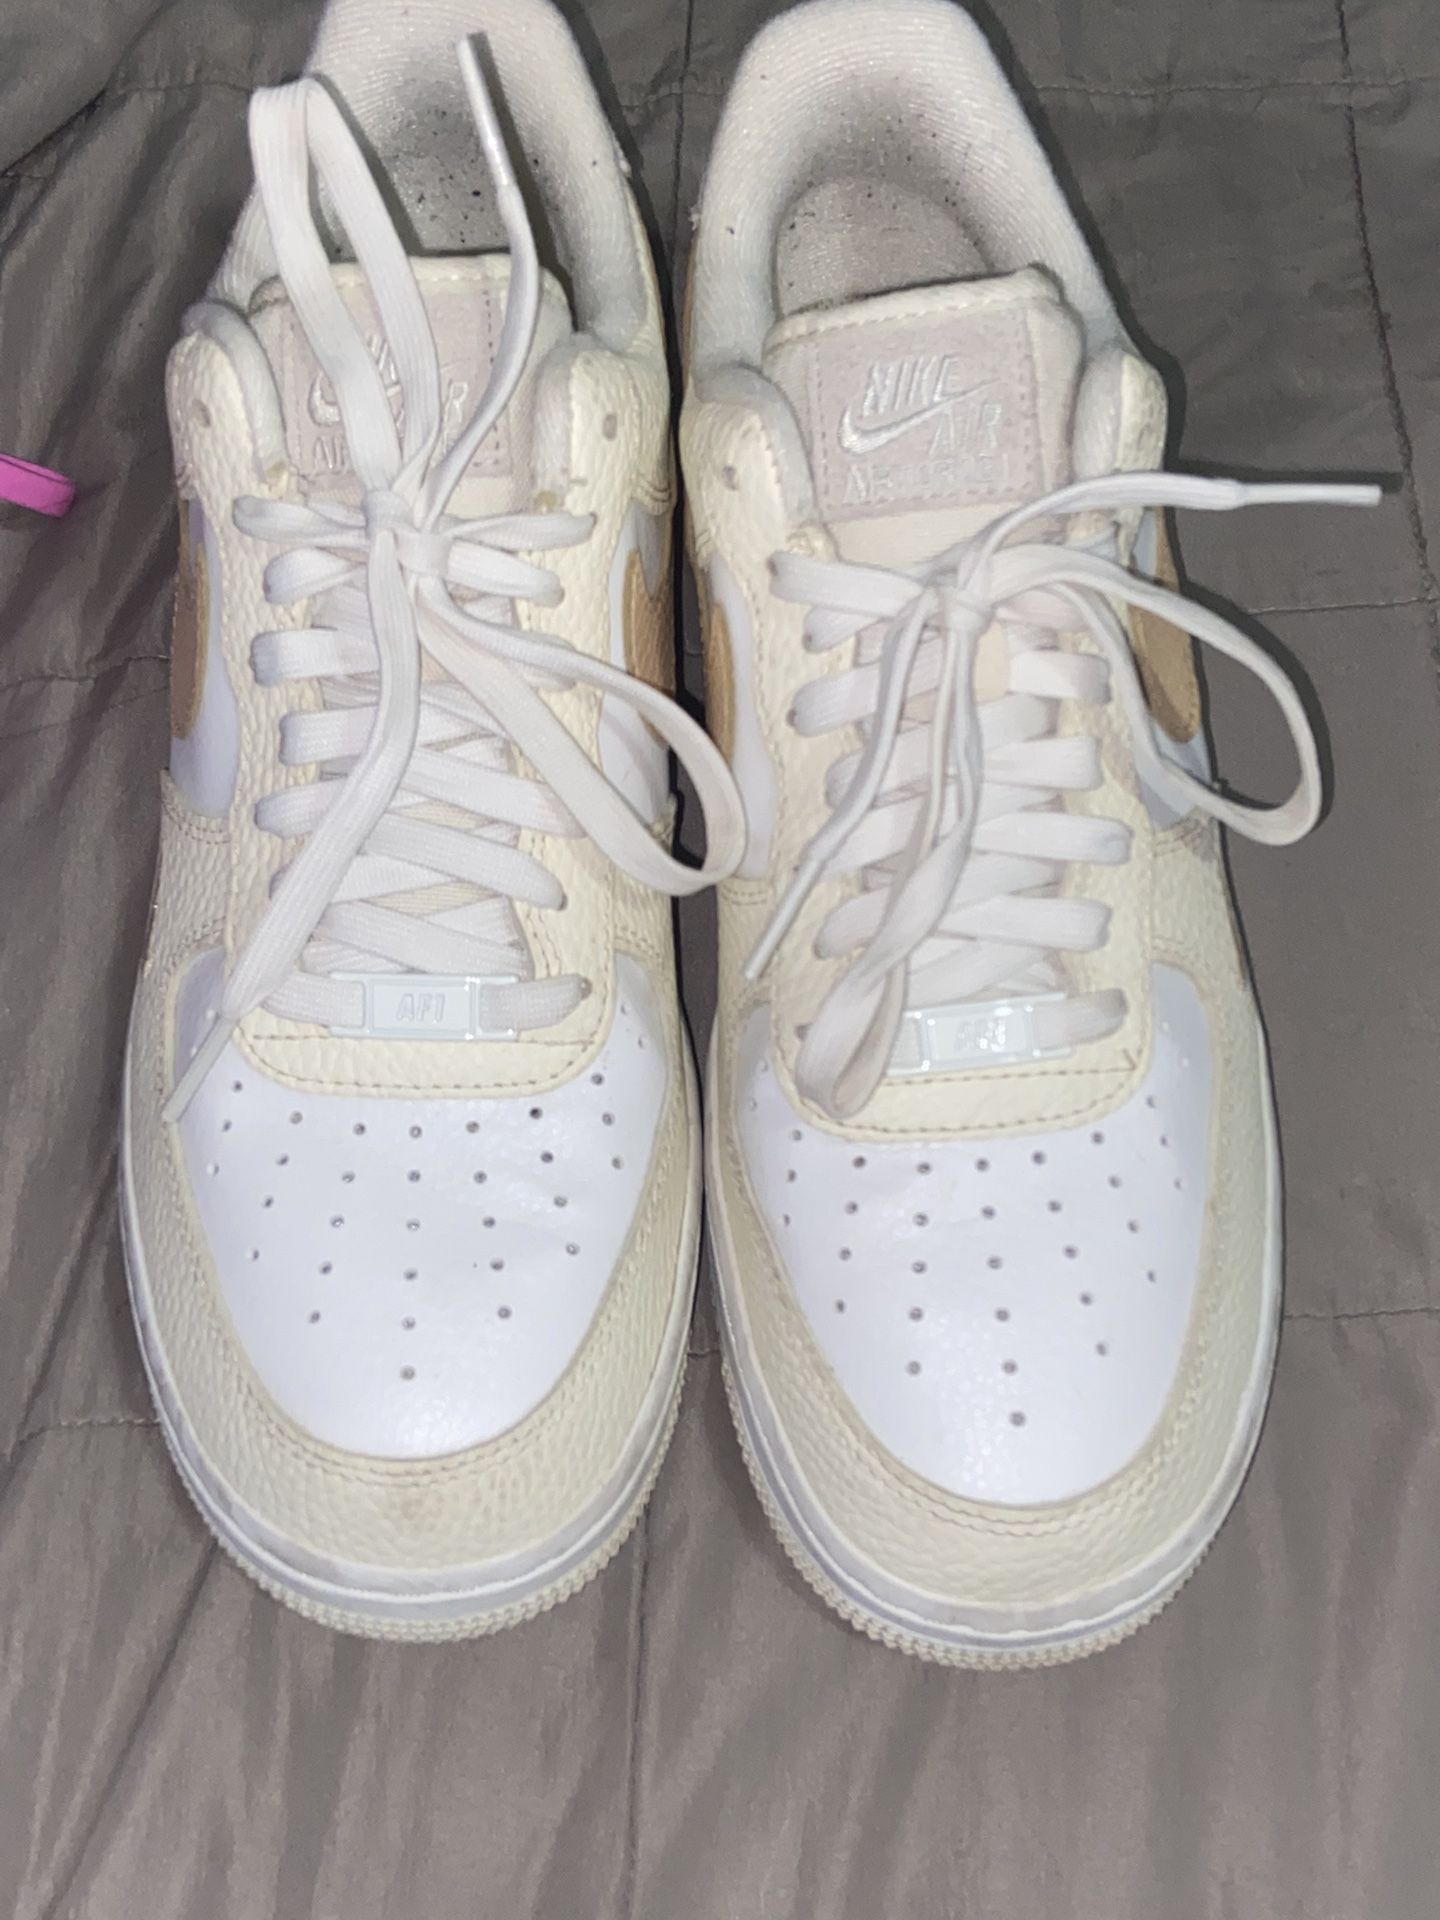 Women’s size 9 Air force ones 